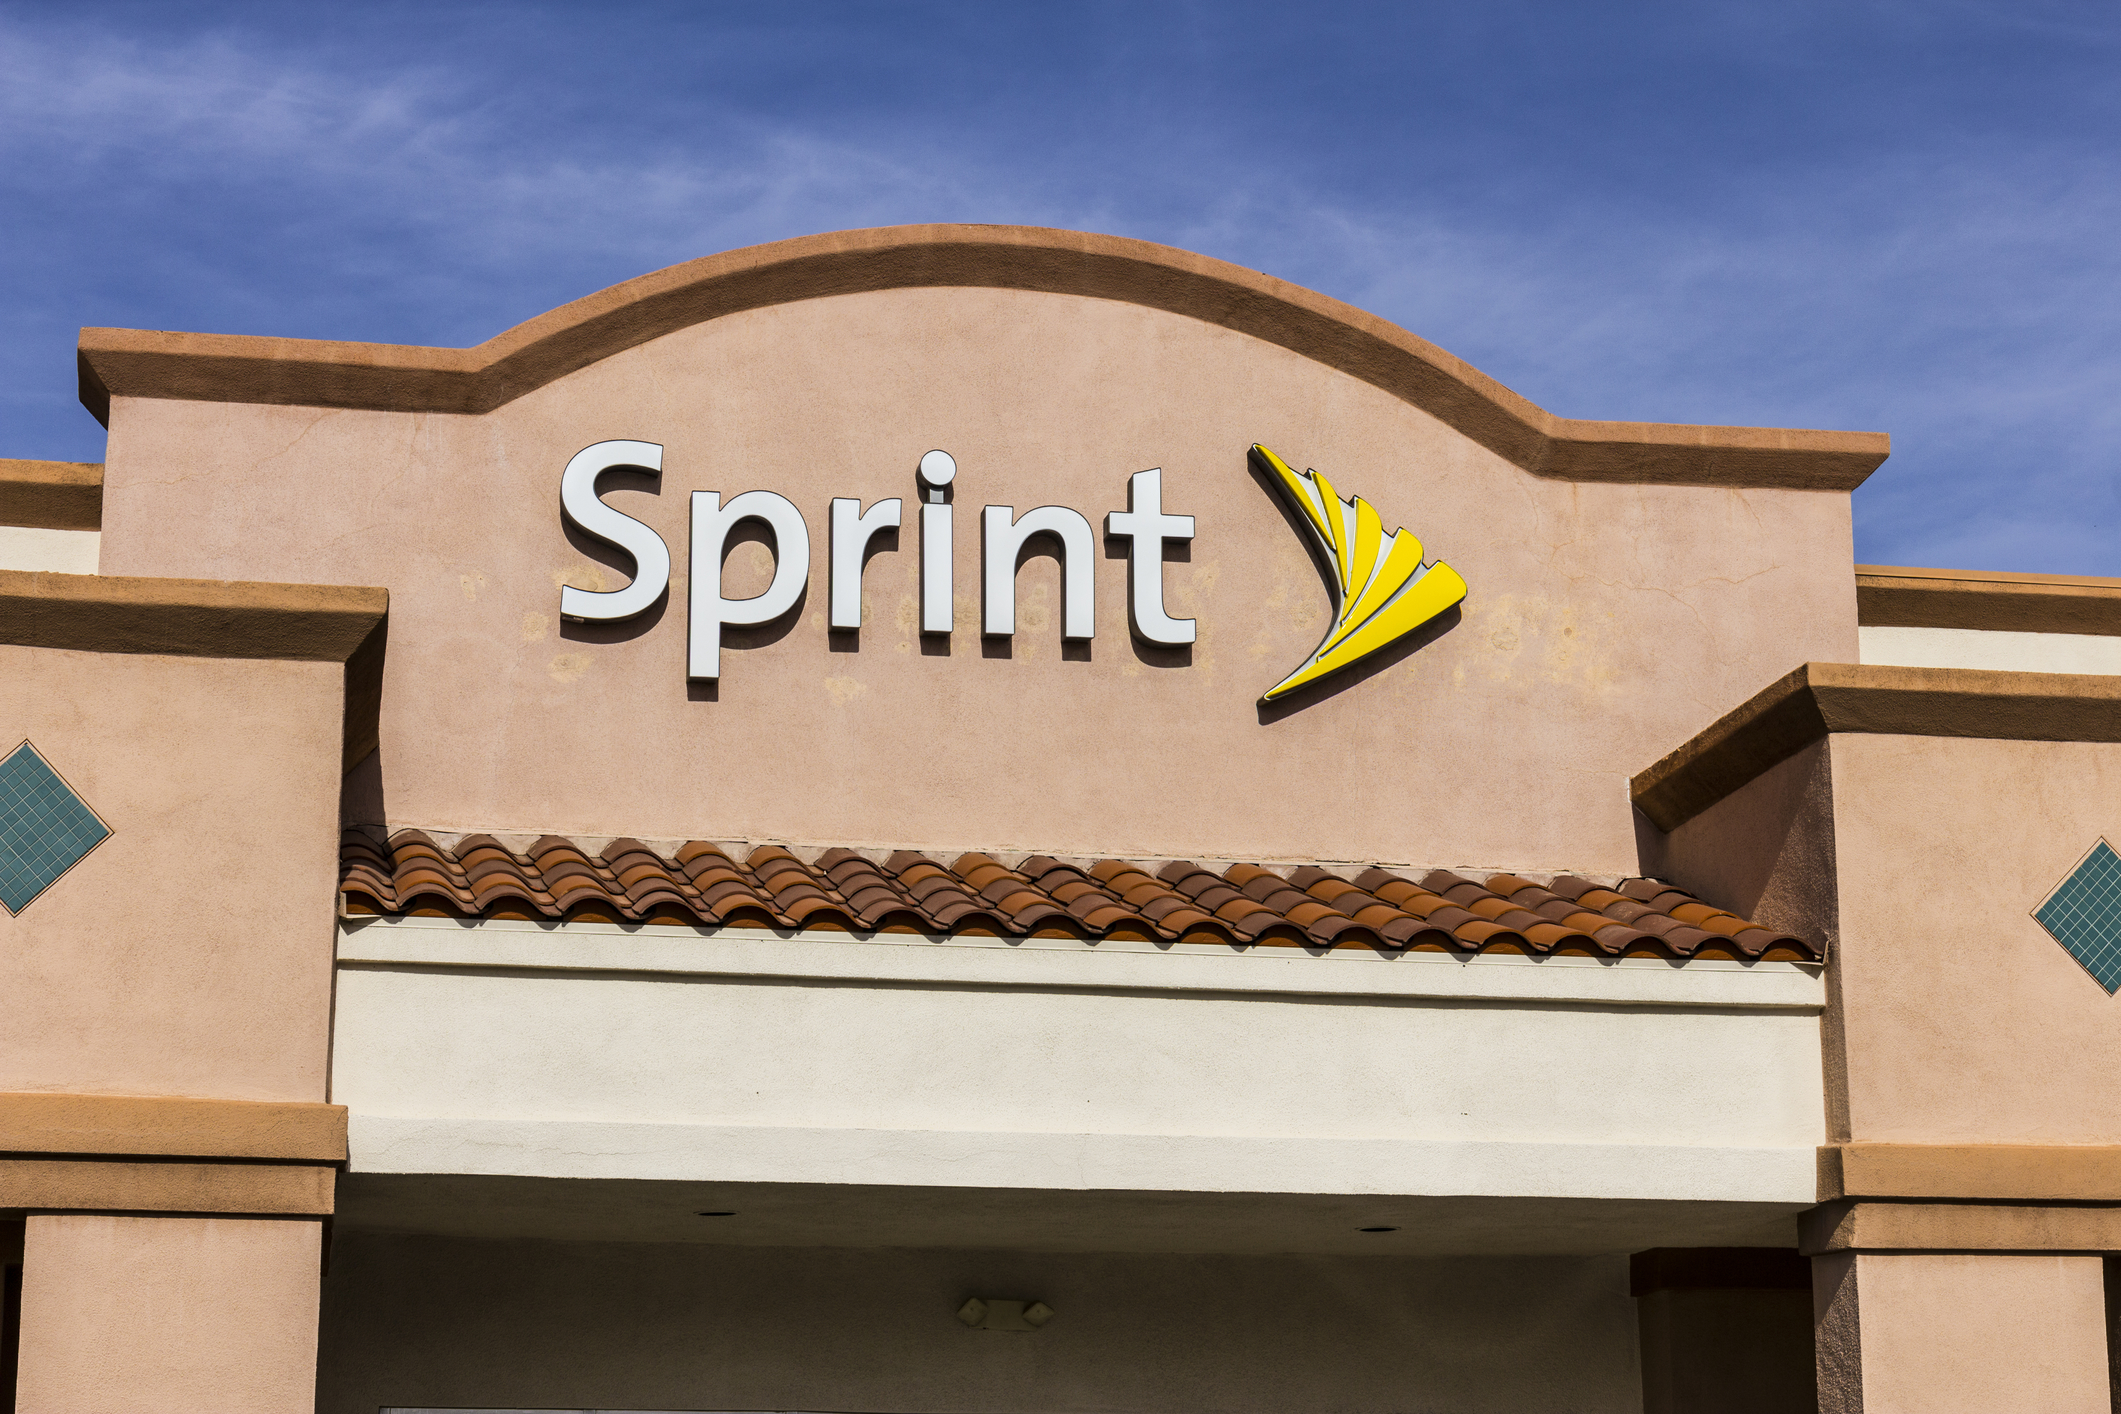 Sprint deals: Get a $300 rebate when you bring your phone and number to Sprint